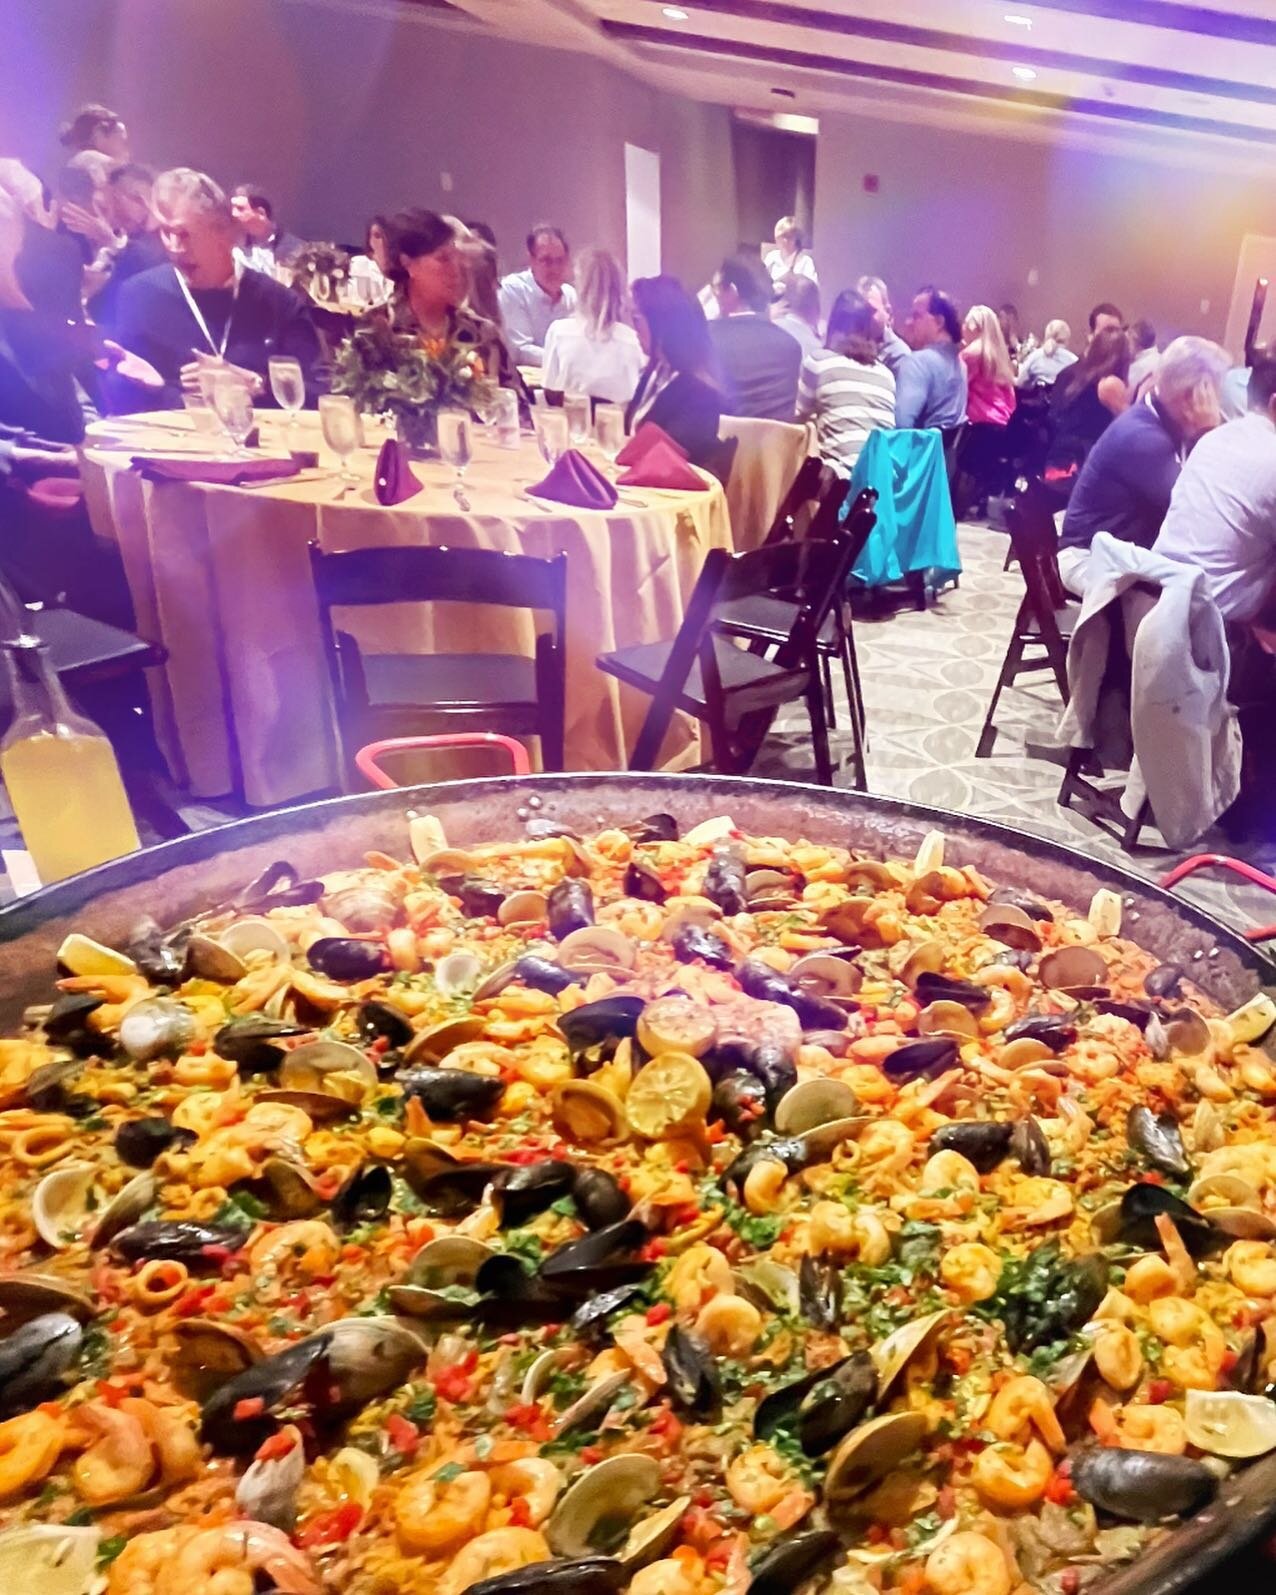 Parent&rsquo;s homecoming event at Tabor Academy - always a fun event! 👩&zwj;🍳🥘✨🧑&zwj;🍳 #paella #homecoming.
.
,
.
.
.
#dinner #dinnerevent #party #dinnerparty #celebration #spanishfood #festive #delicious #partyideas #partyfood #partyplanning #